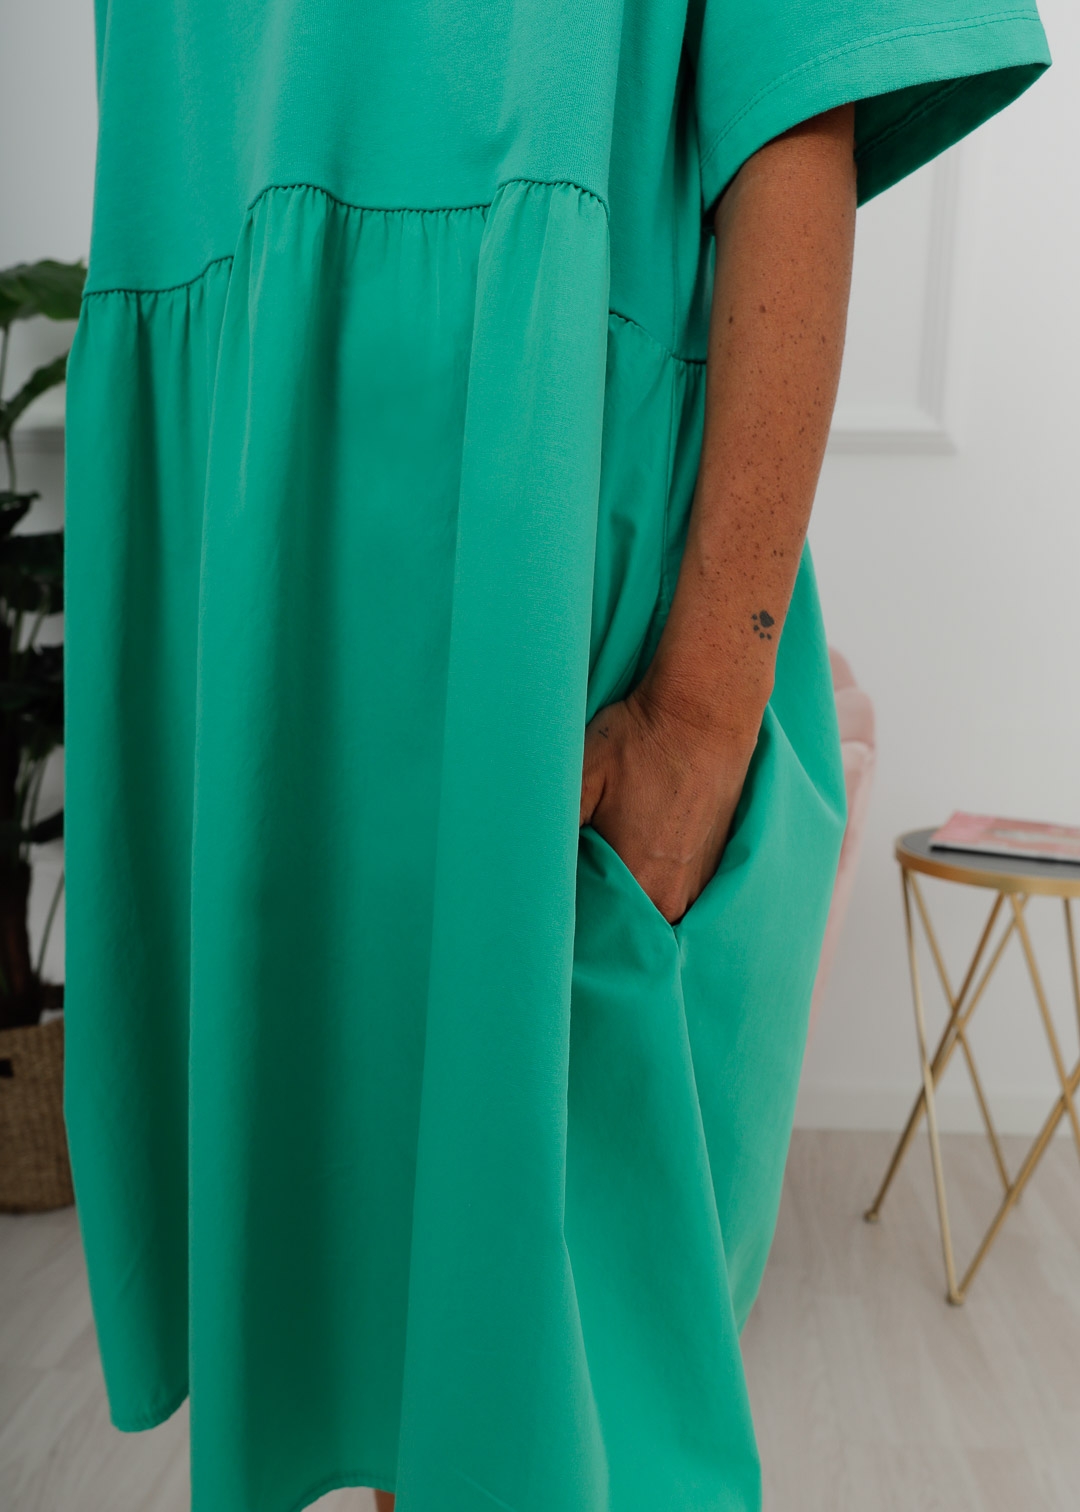 GREEN DRESS WITH SHORT SLEEVE